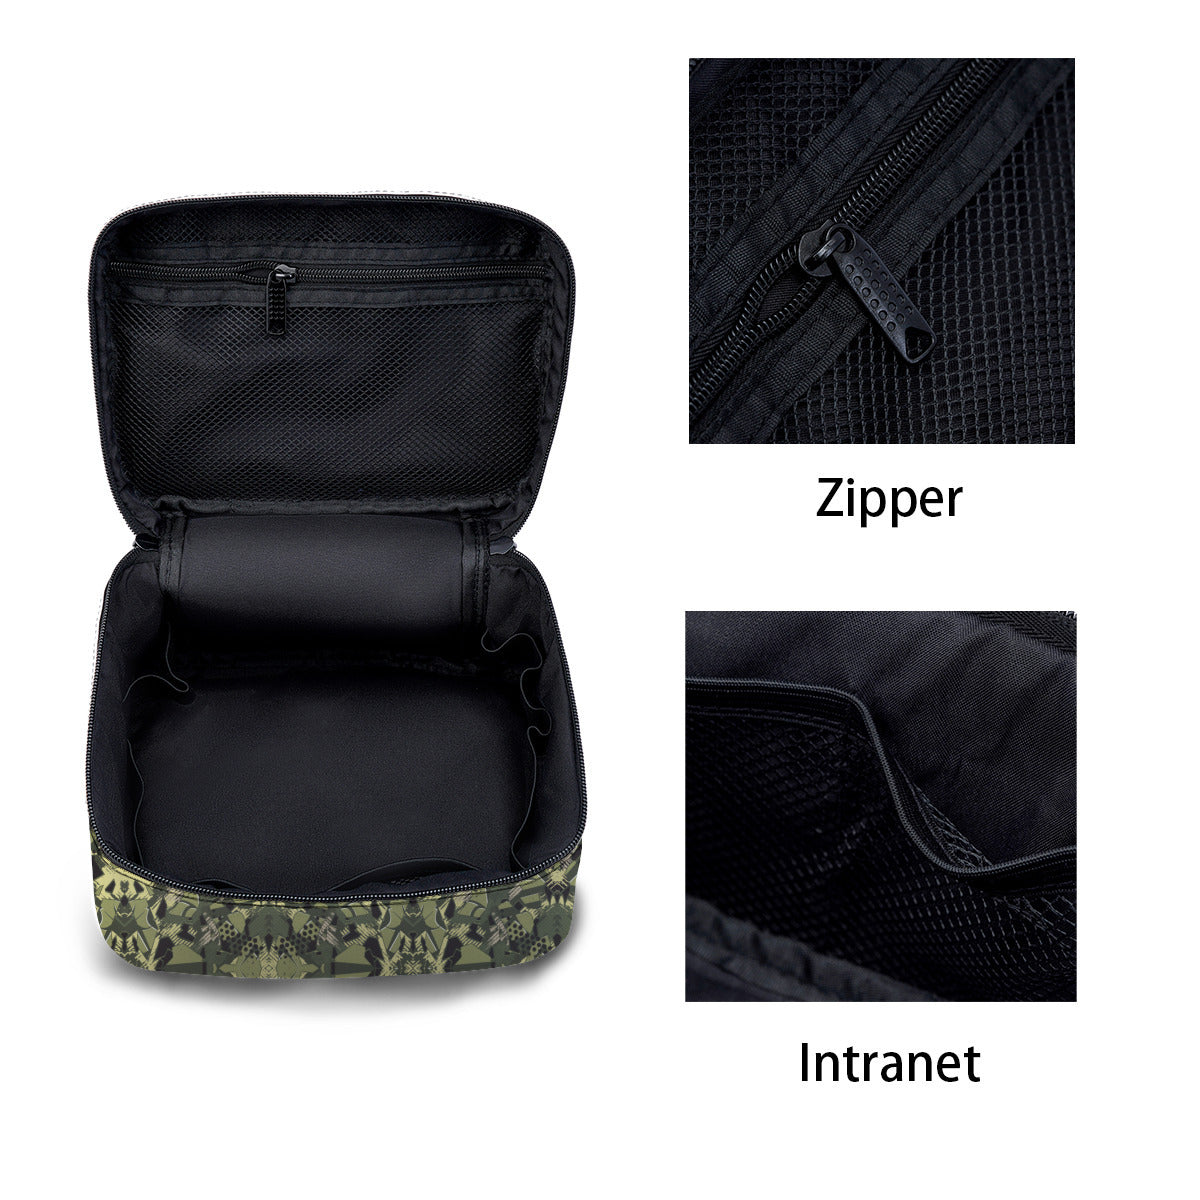 Travel bag for your medical supplies